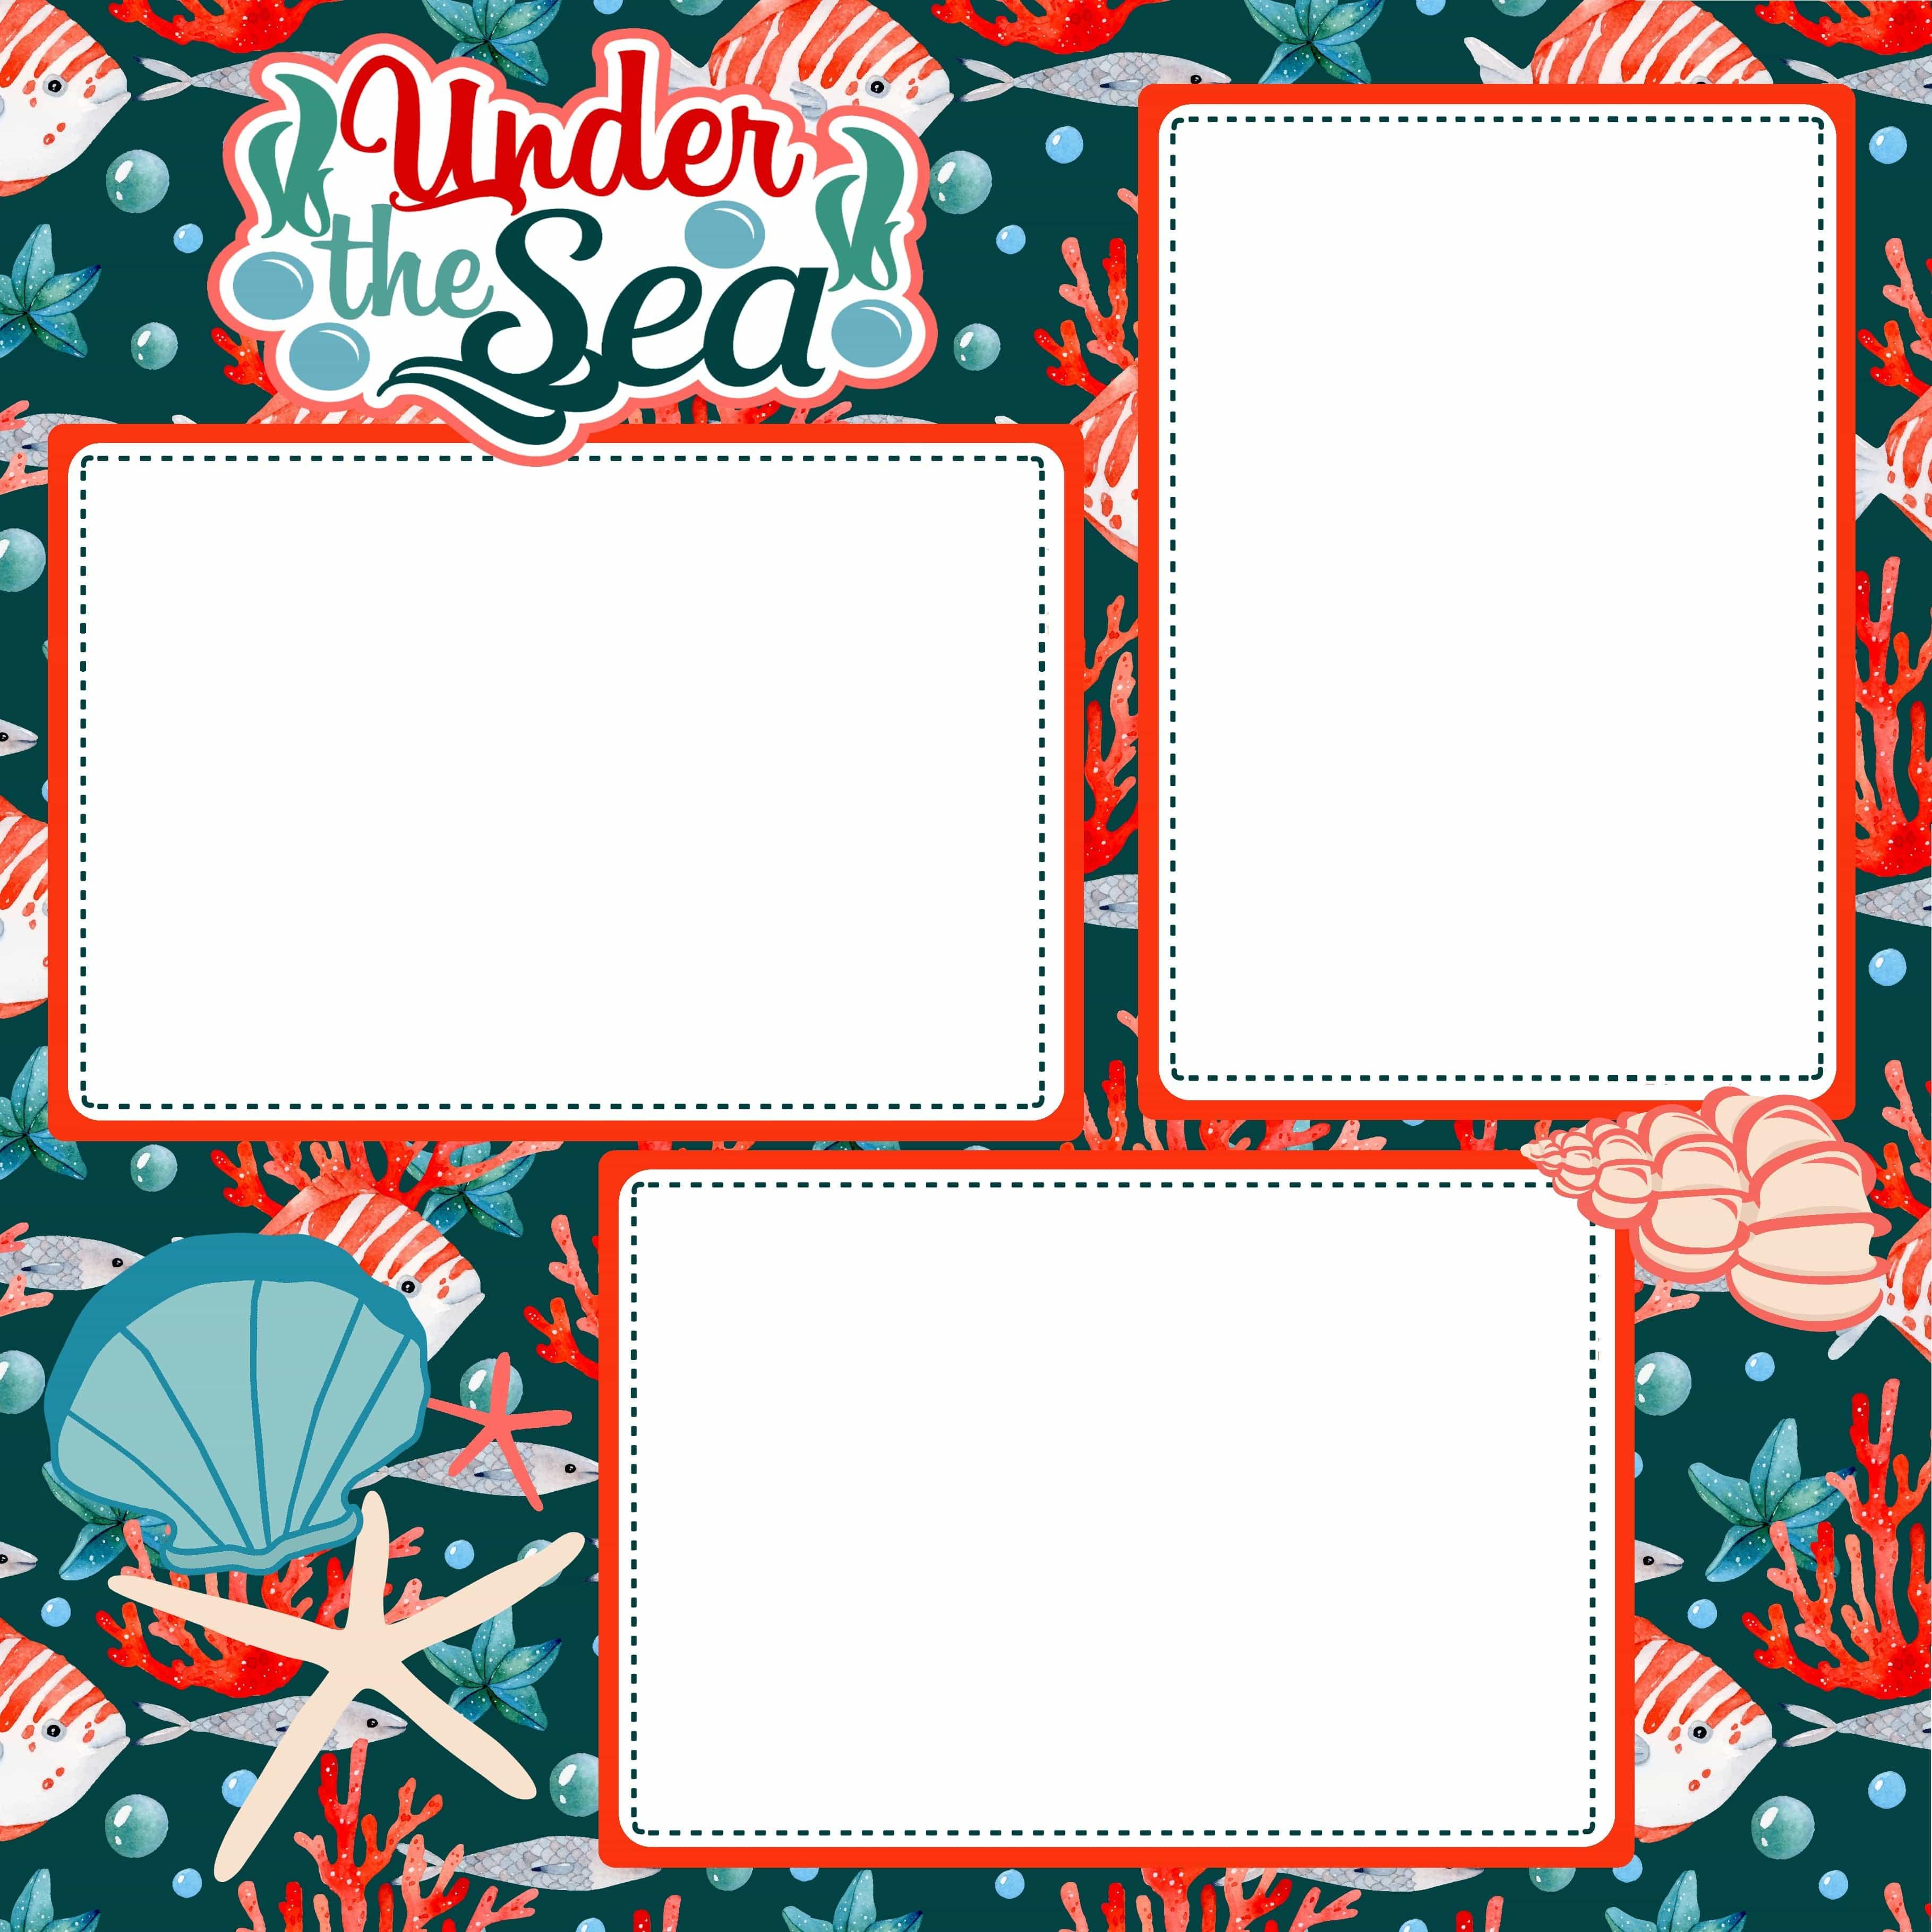 Under The Sea Tropical (2) - 12 x 12 Premade, Printed Scrapbook Pages by SSC Designs - Scrapbook Supply Companies